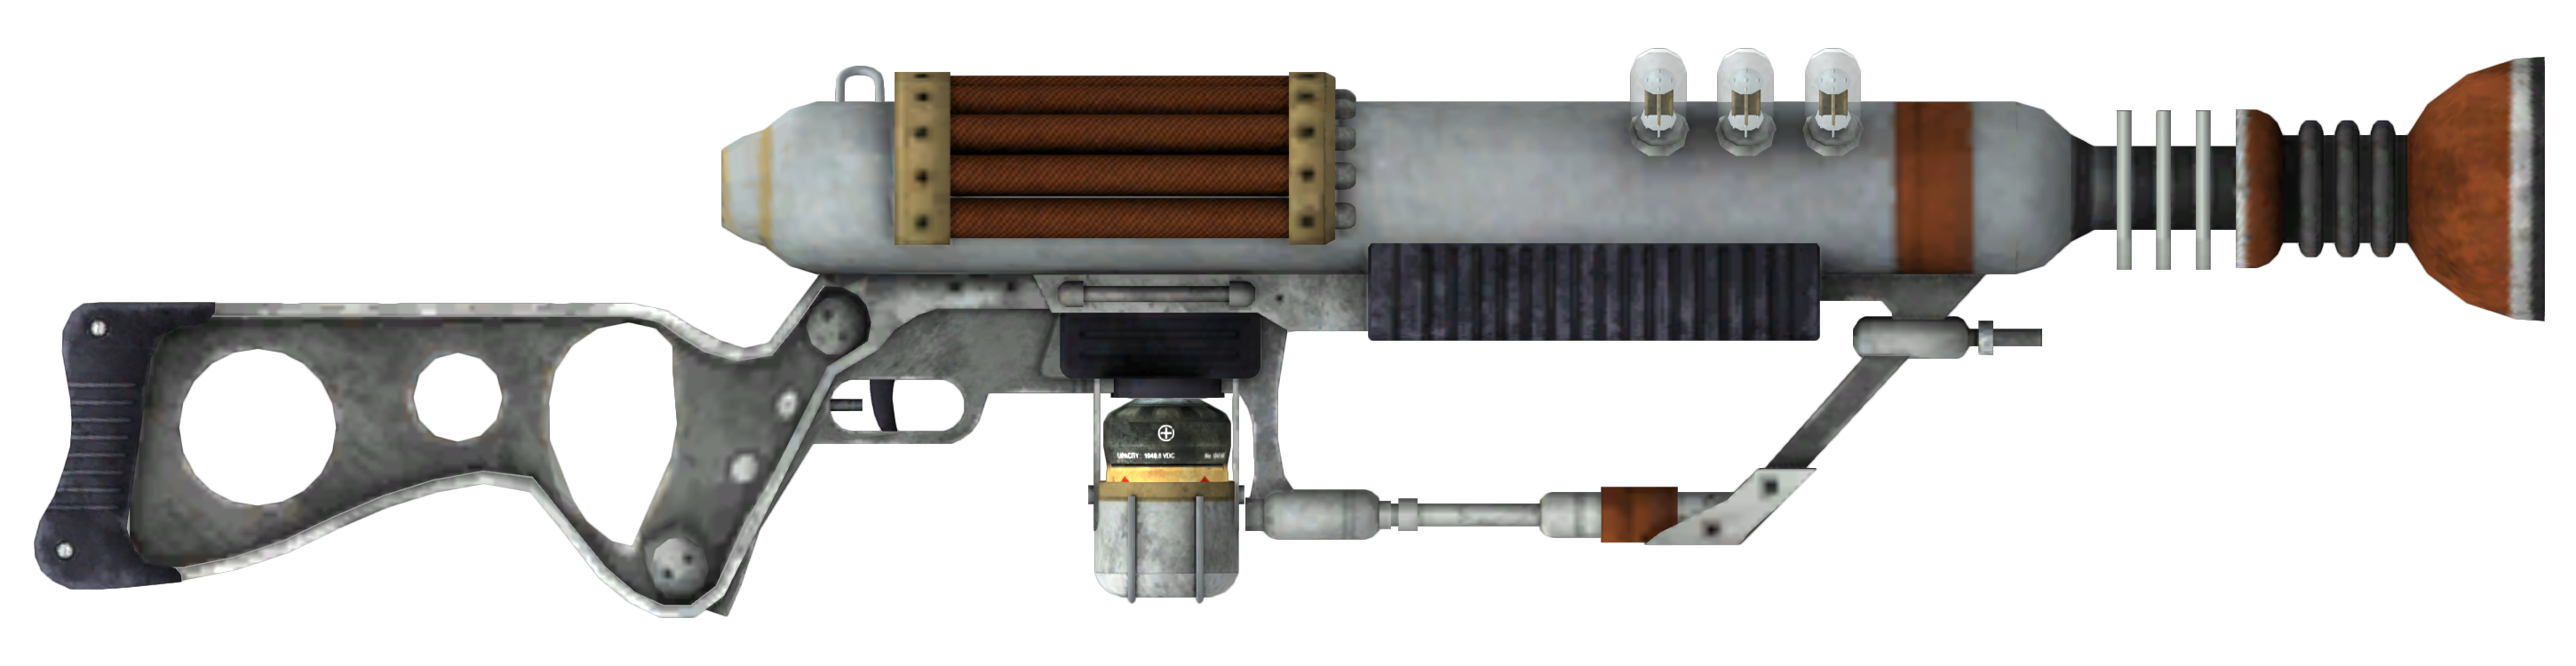 Corpse Finder, Fallout Wiki